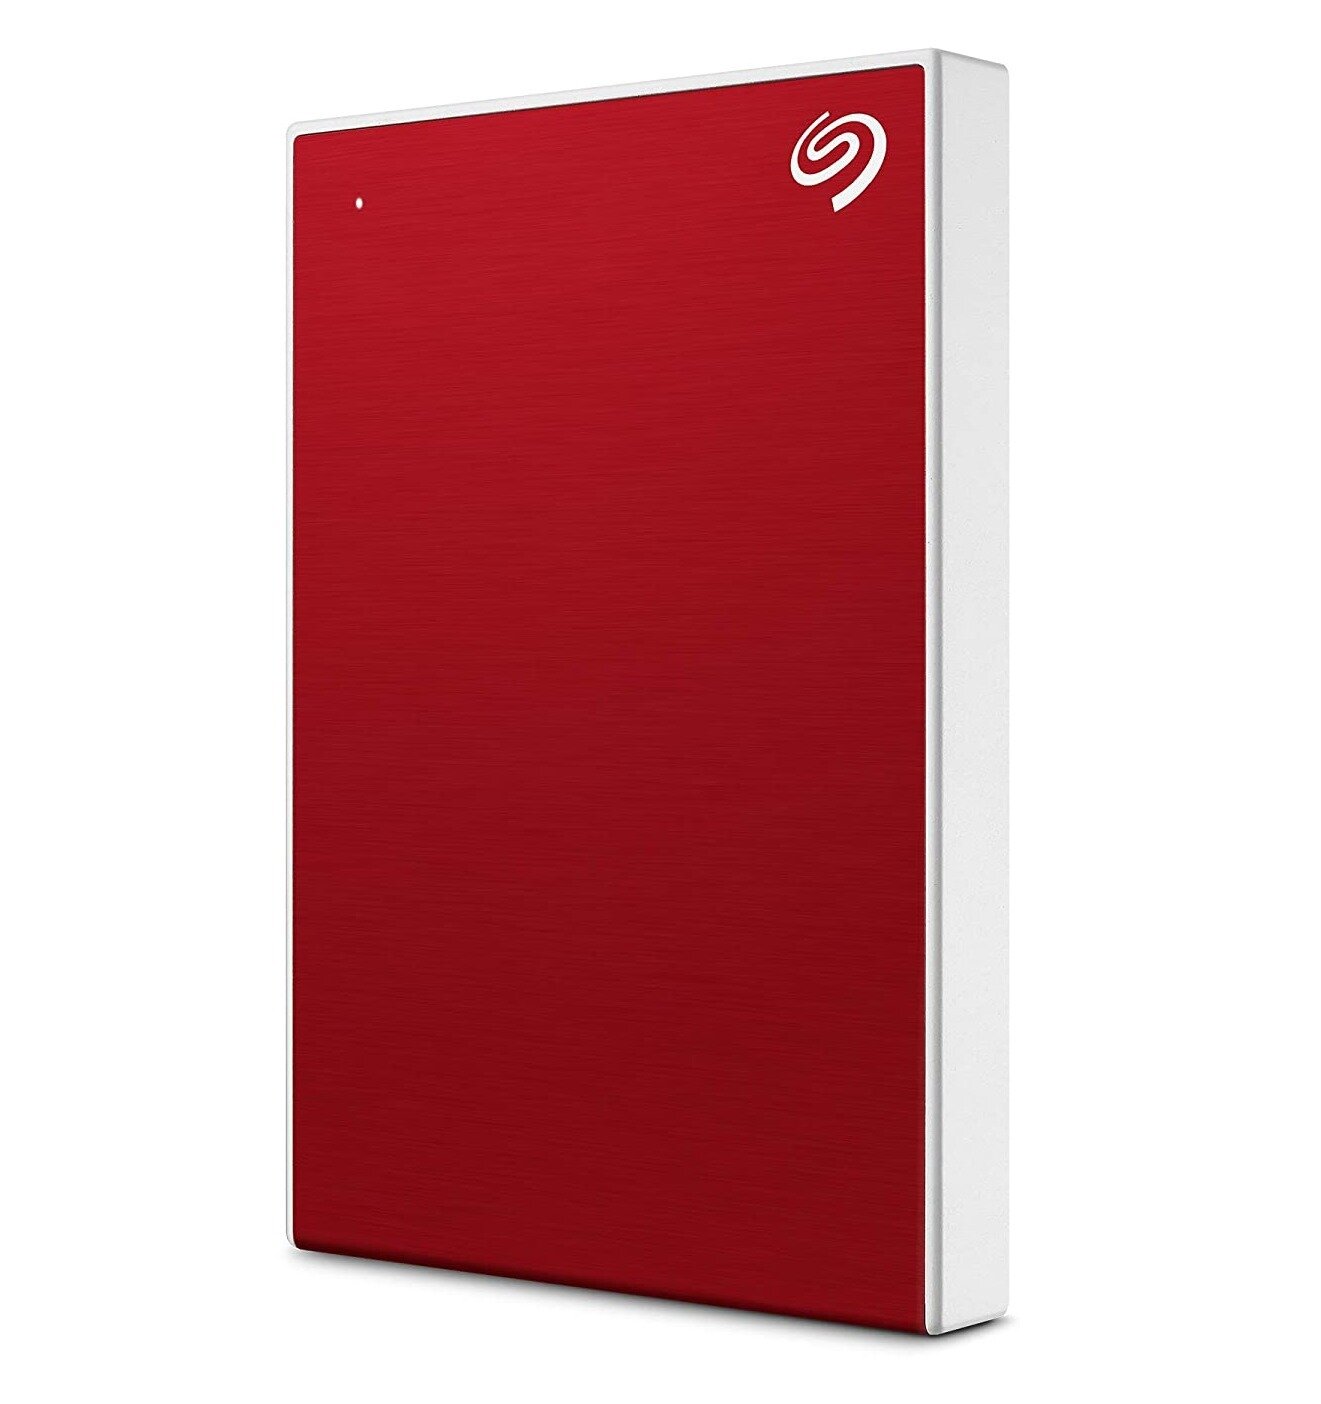 Seagate One Touch 1TB External HDD - Red (STKY1000403)